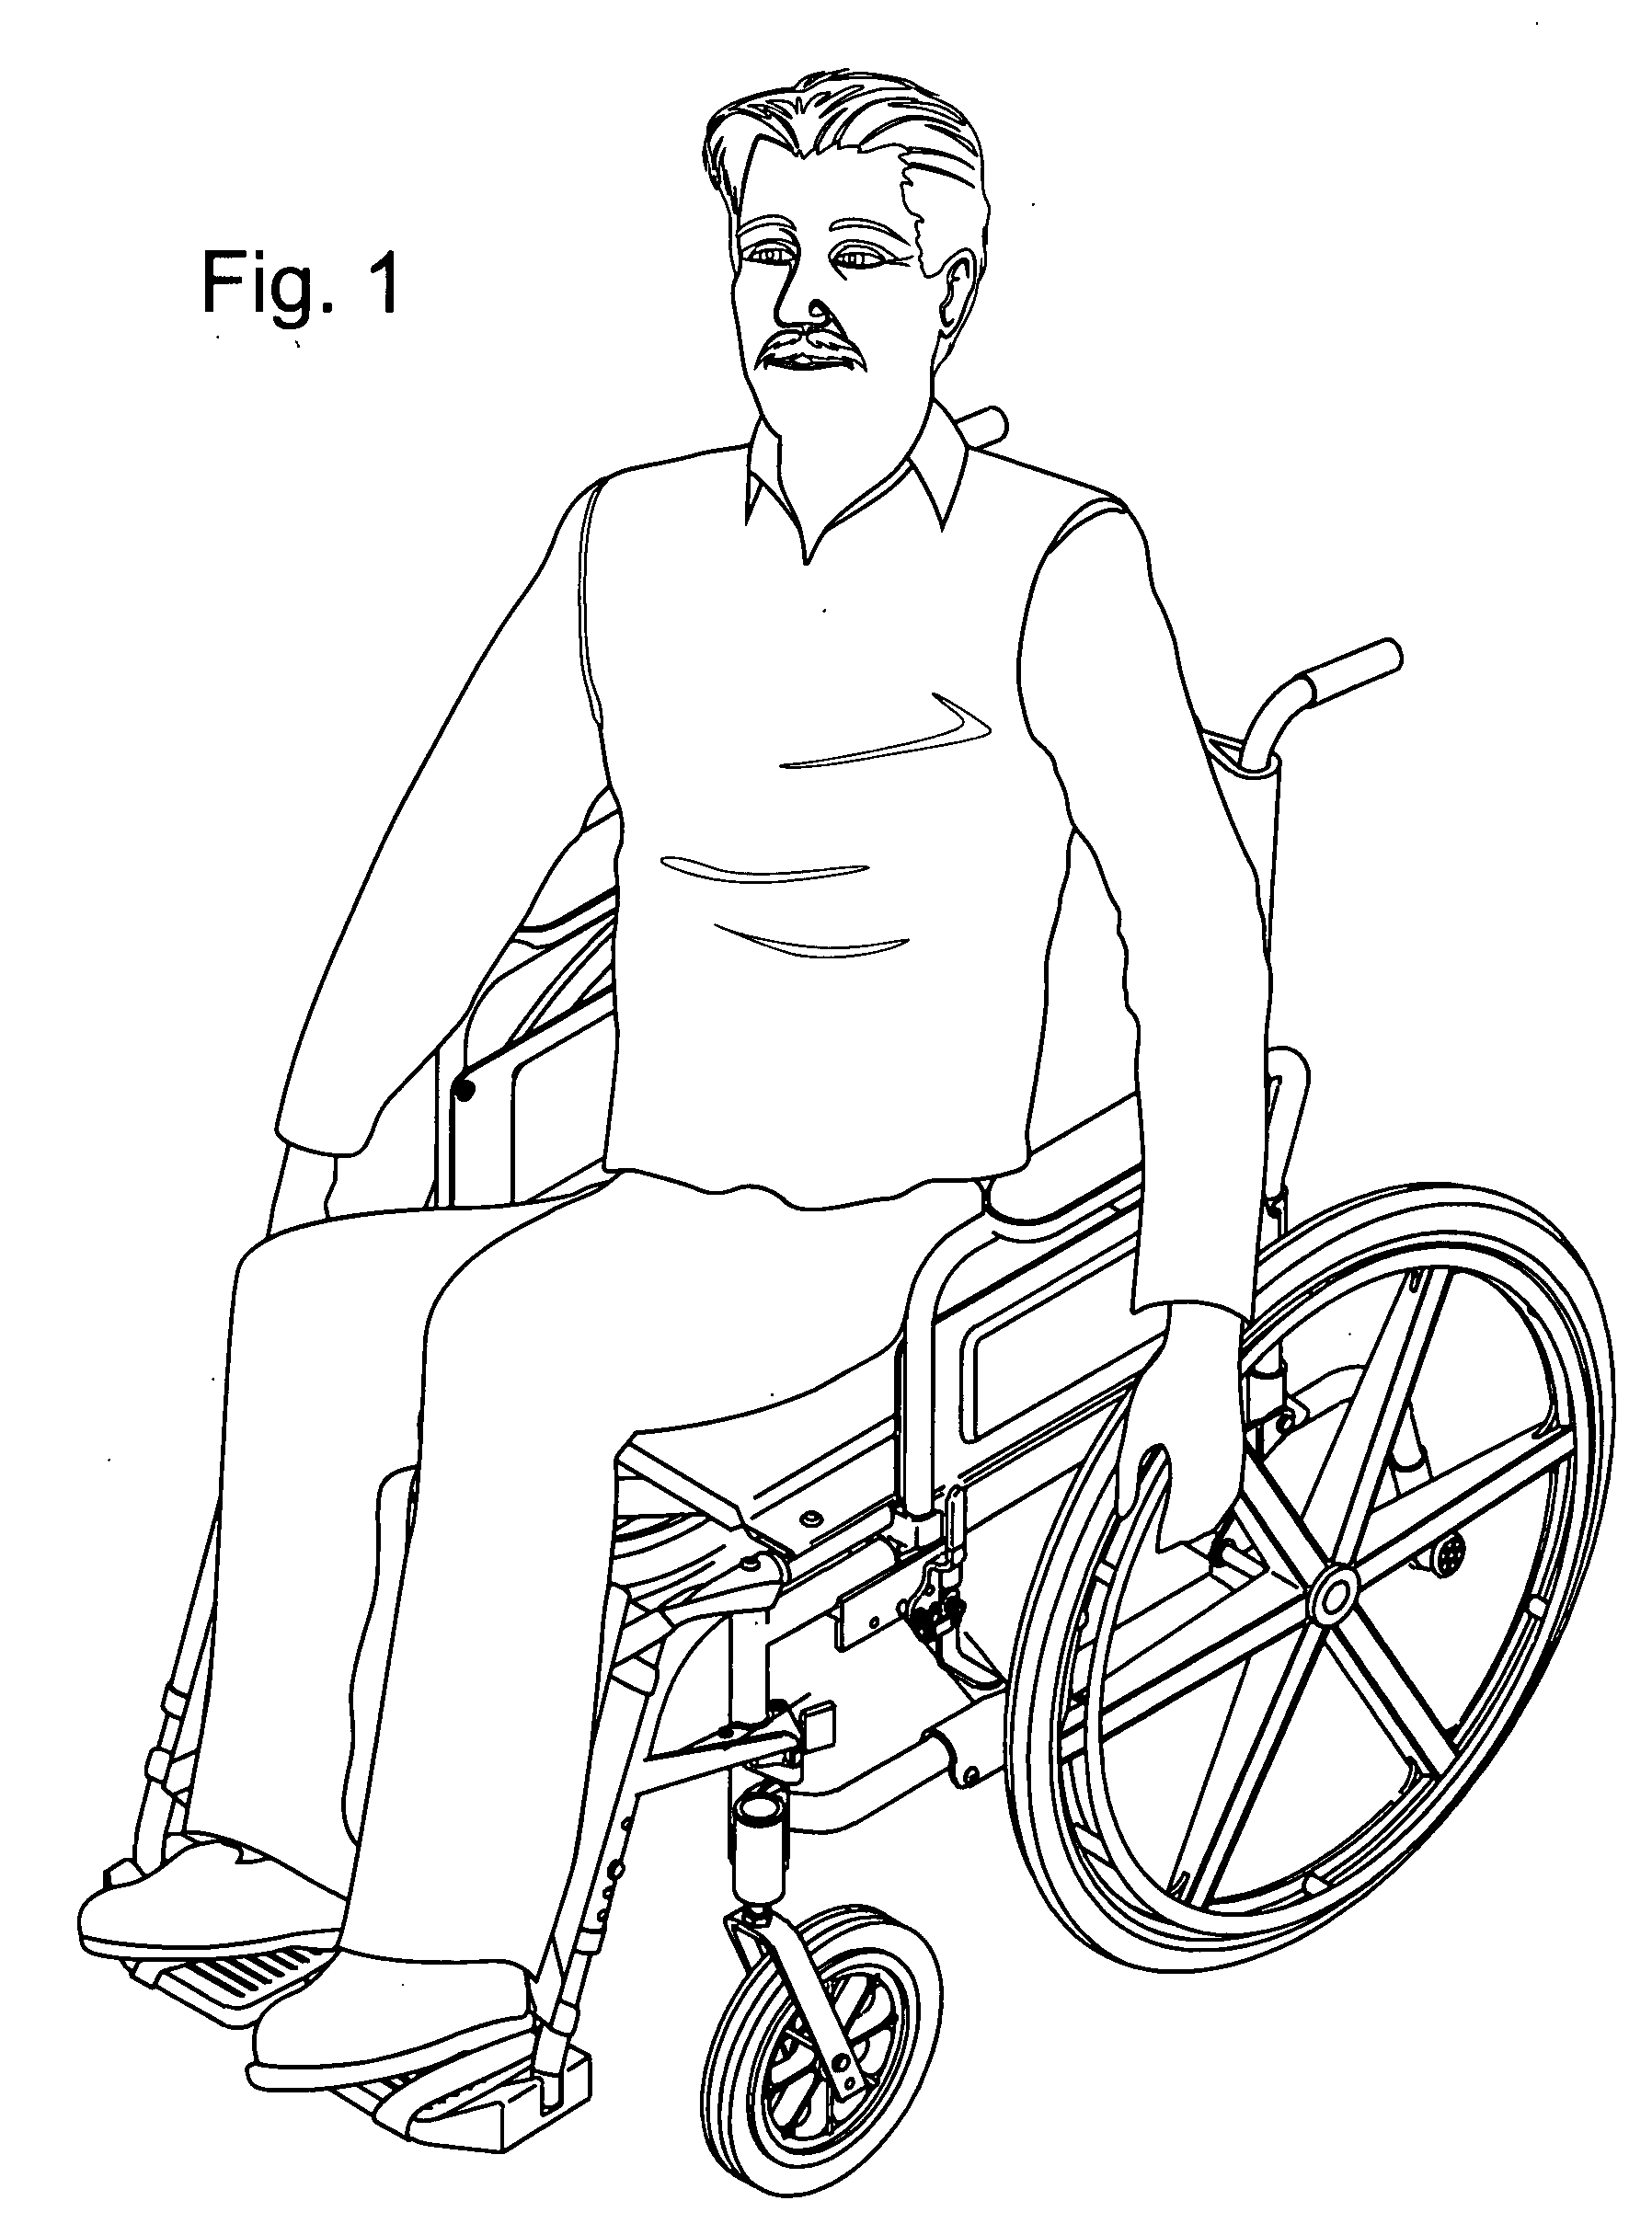 Cushion support for wheelchairs